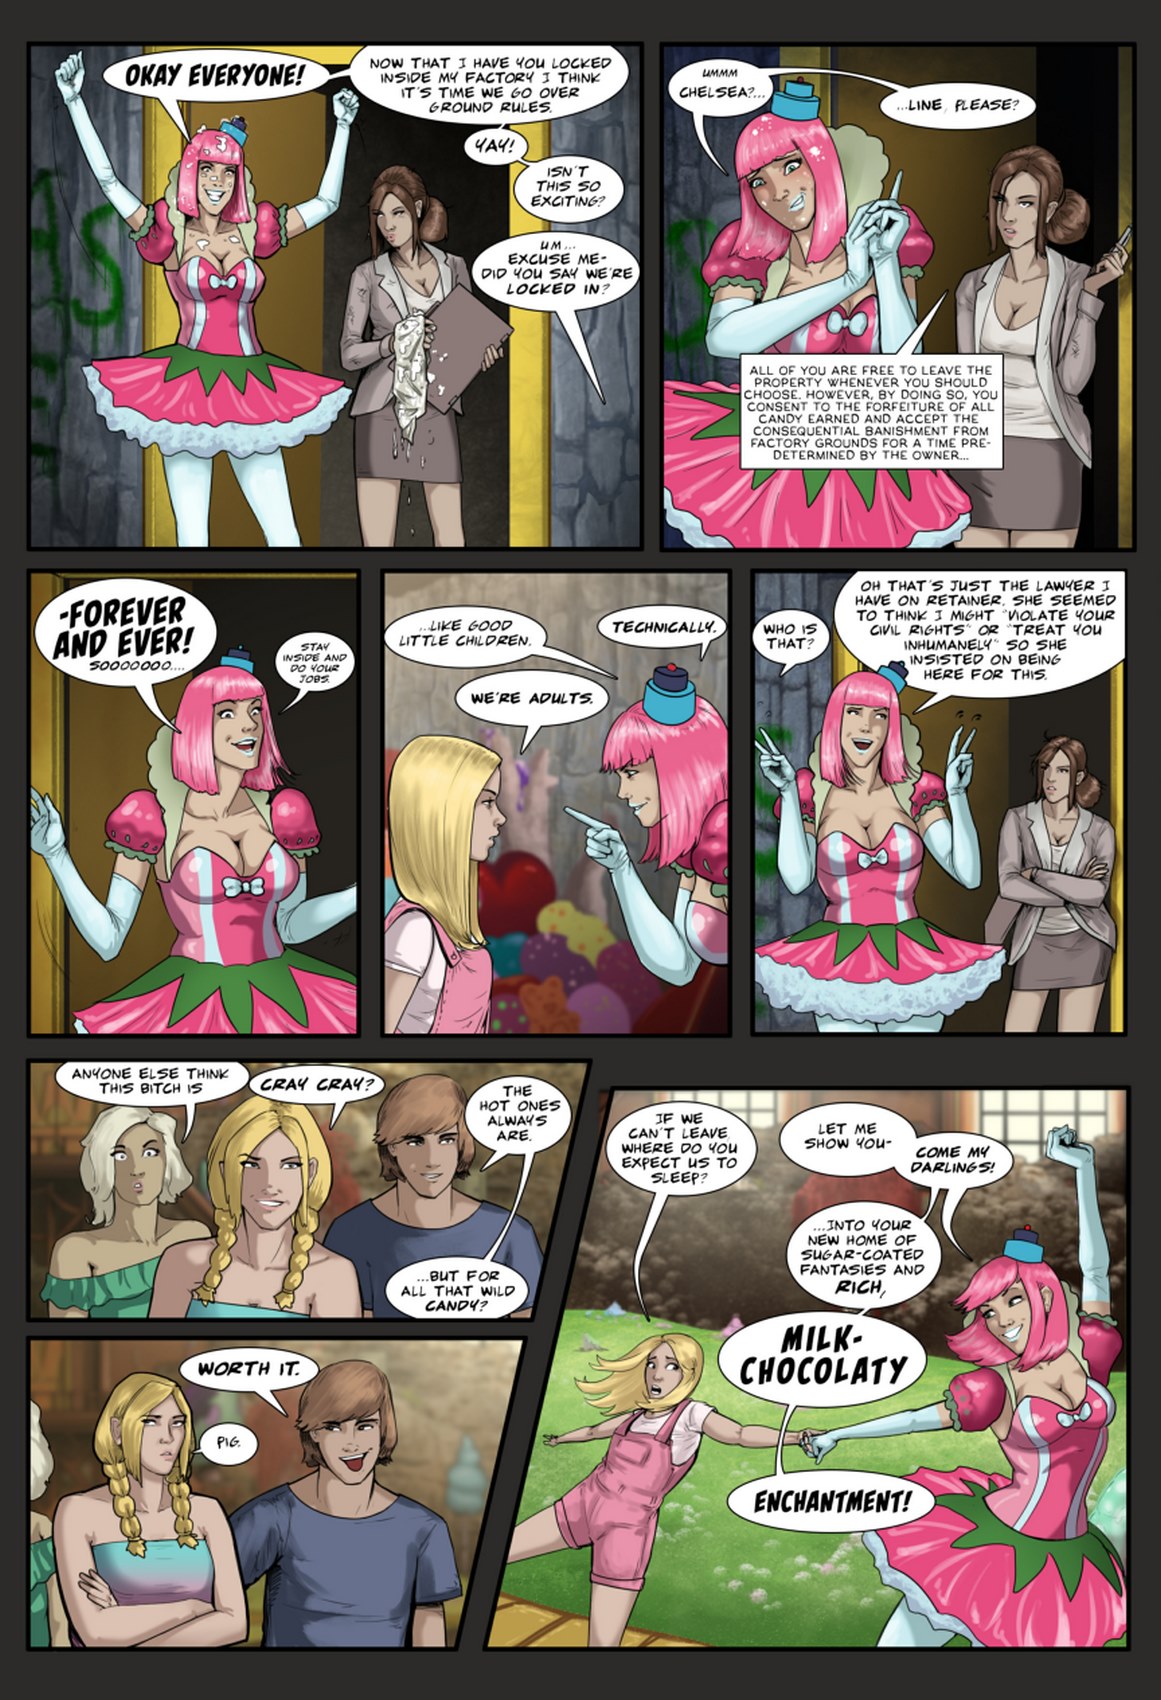 Wendy Wonka and the Chocolate Fetish Factory - Ch.2 Issue 2.